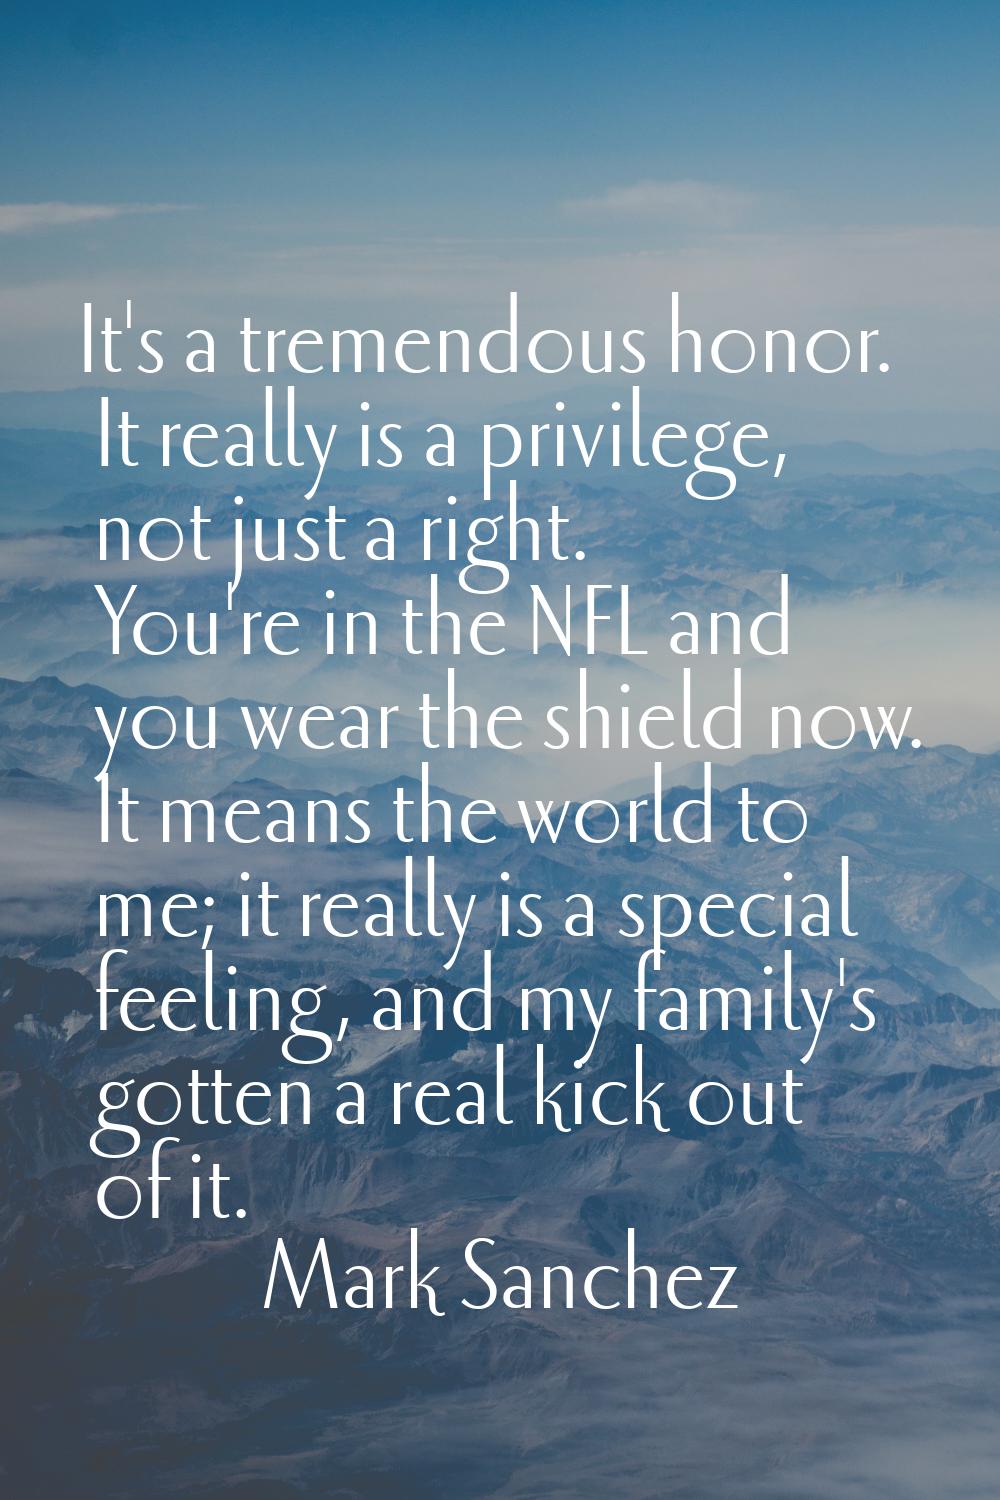 It's a tremendous honor. It really is a privilege, not just a right. You're in the NFL and you wear